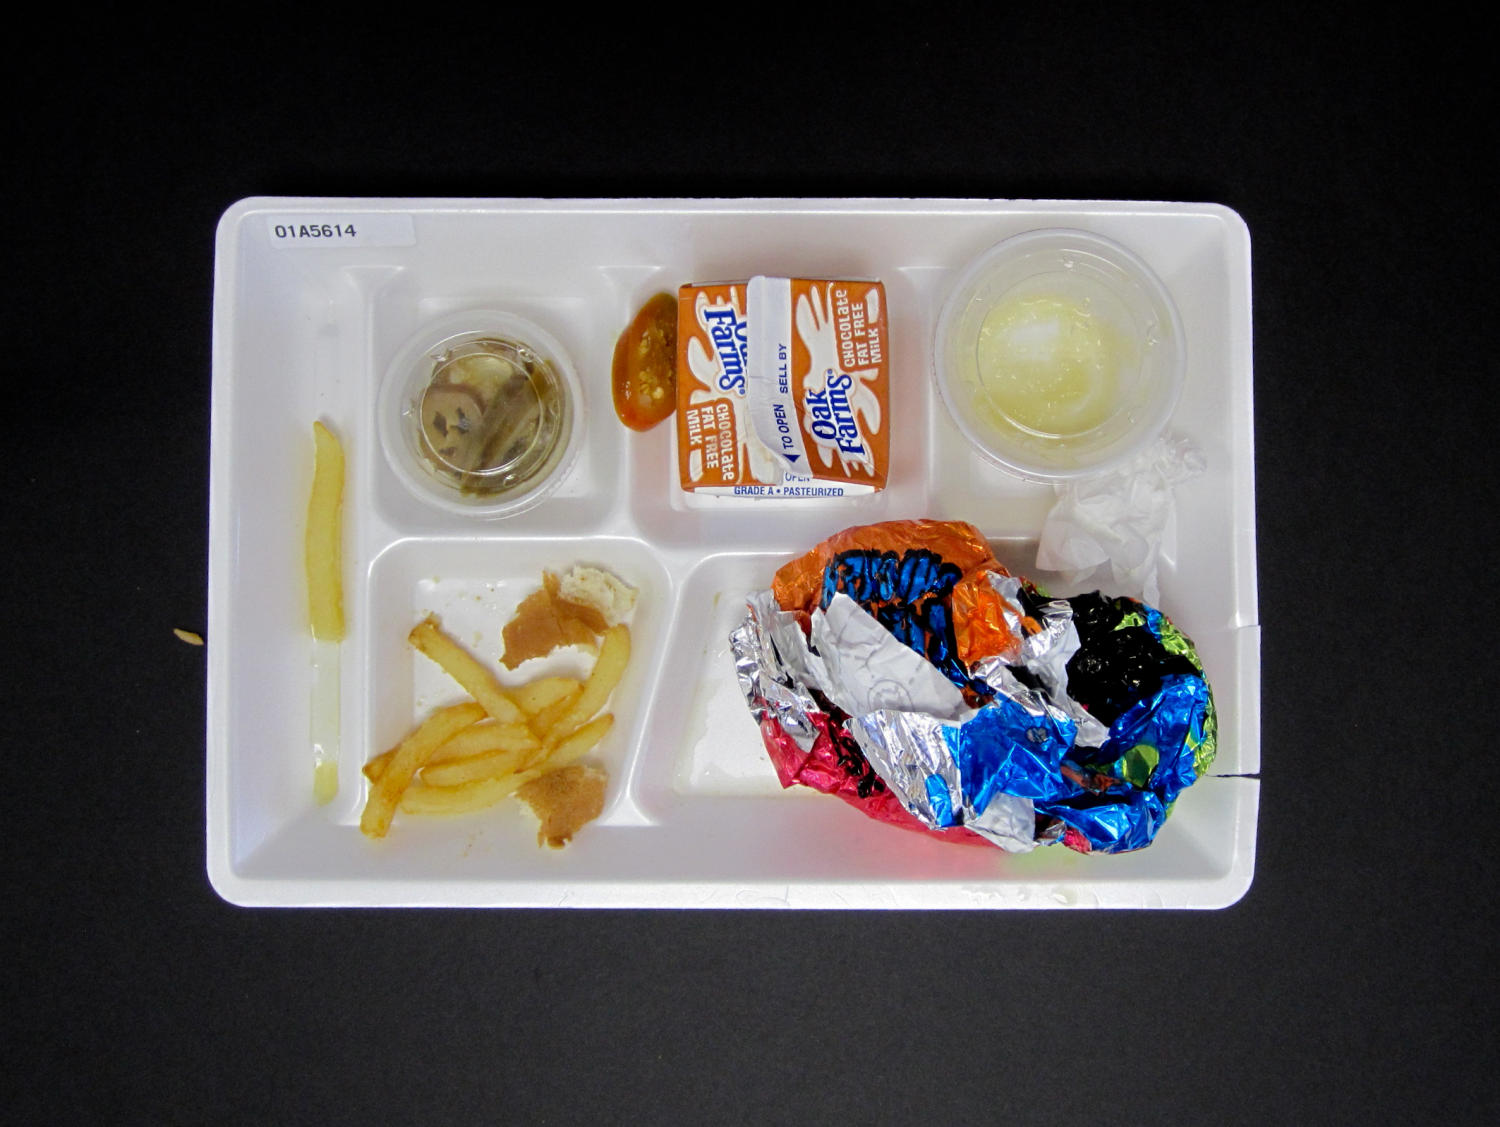 Student Lunch Tray: 01_20110216_01A5614
                                                
                                                    [Sequence #]: 2 of 2
                                                